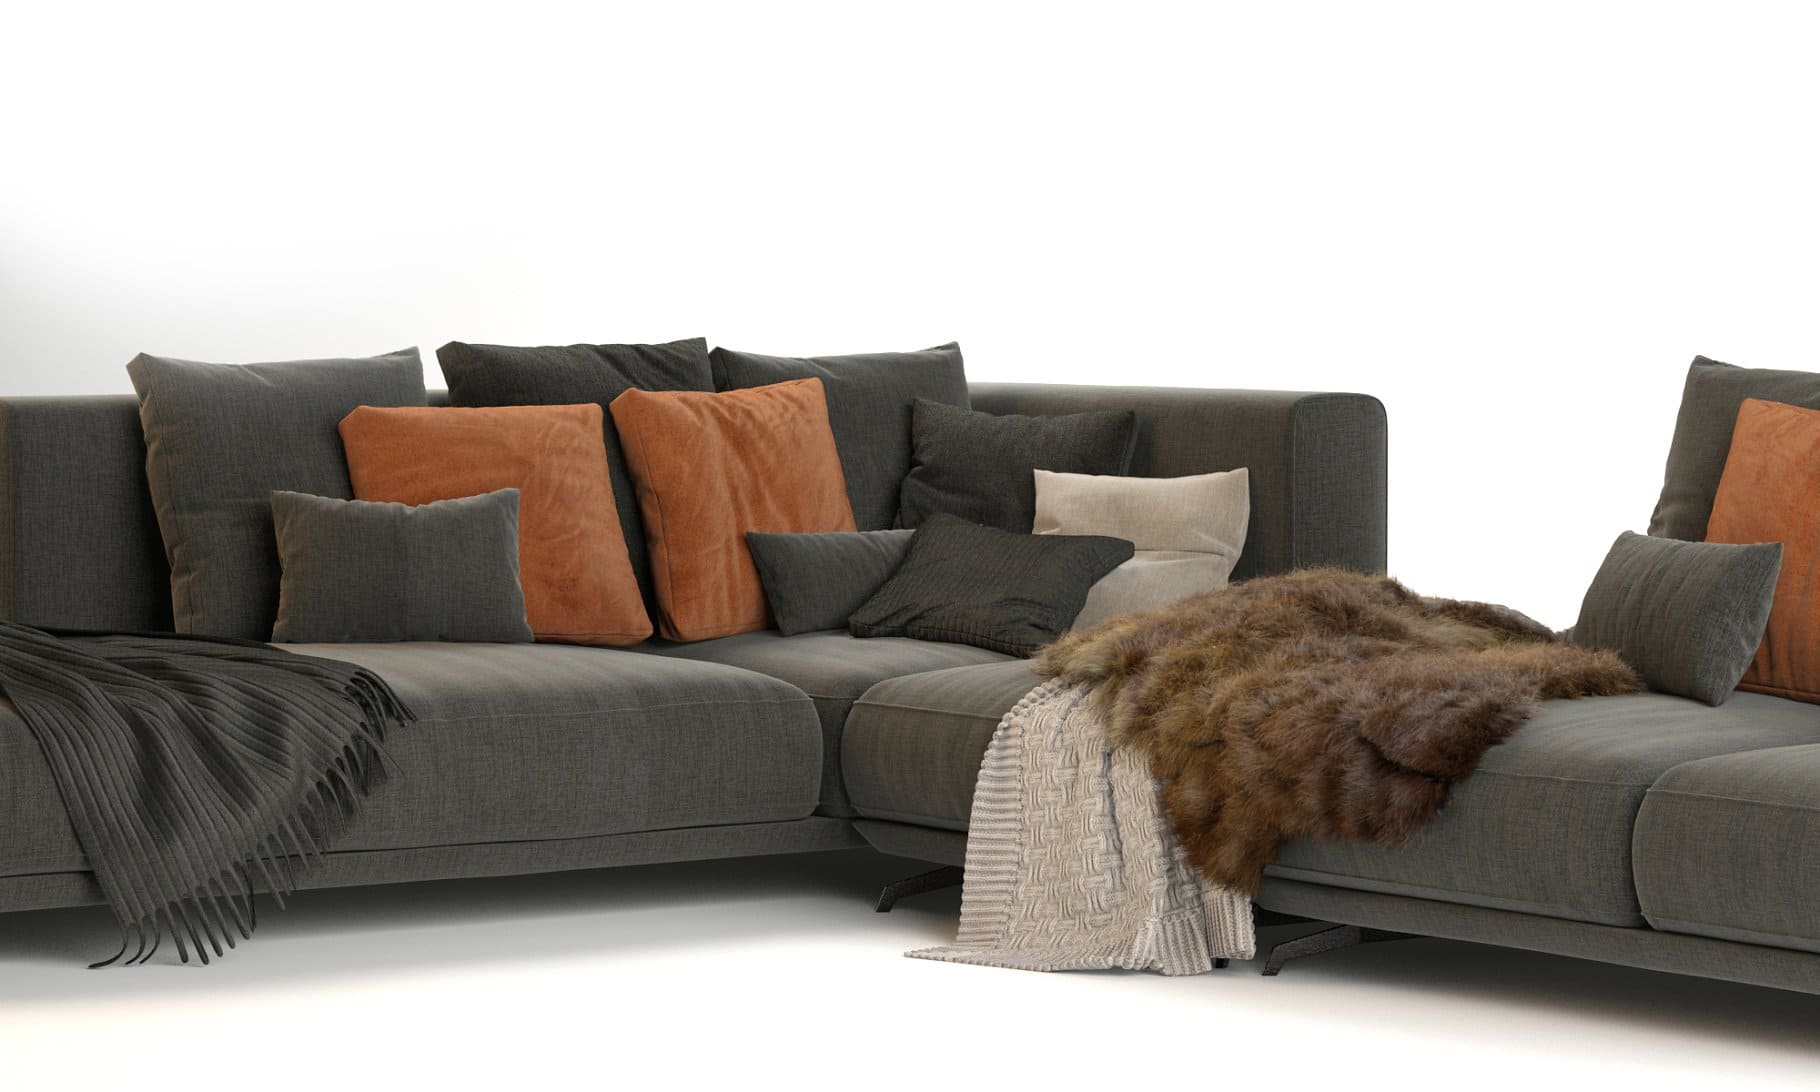 Cushions of different sizes in gray and beige on Dalton Sofa by Ditre Italia.